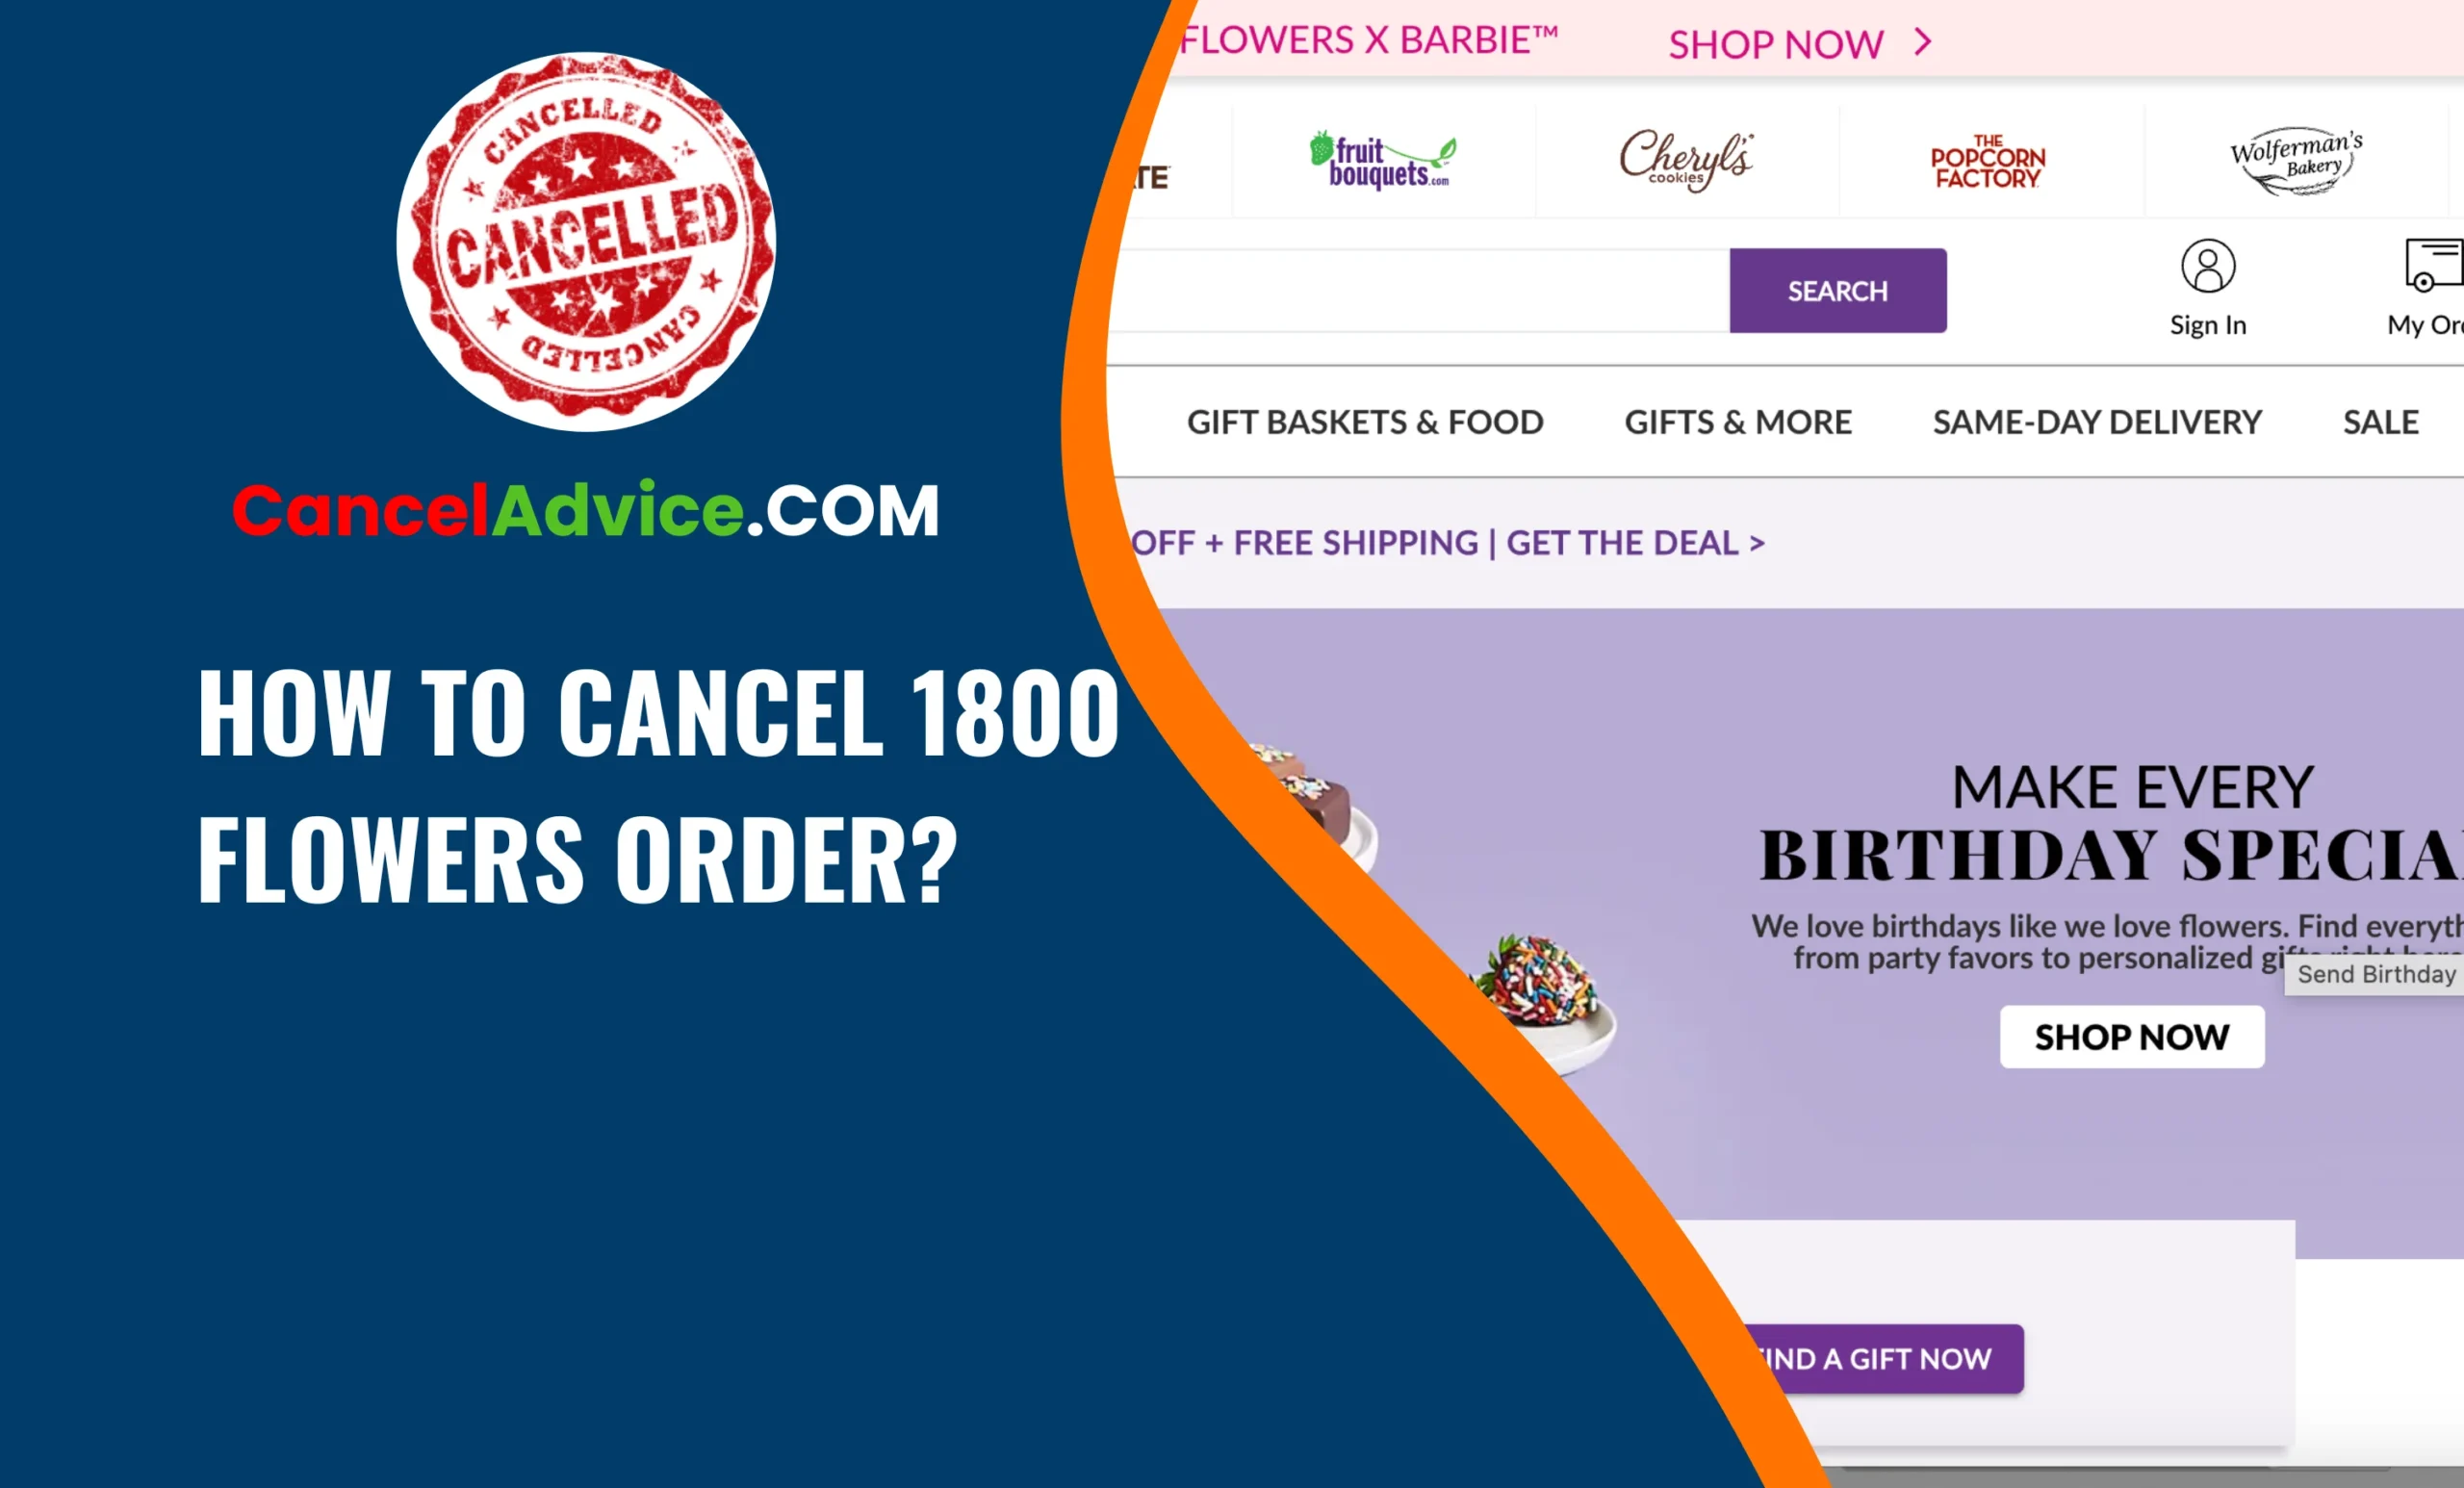 How To Cancel 1800 Flowers Order